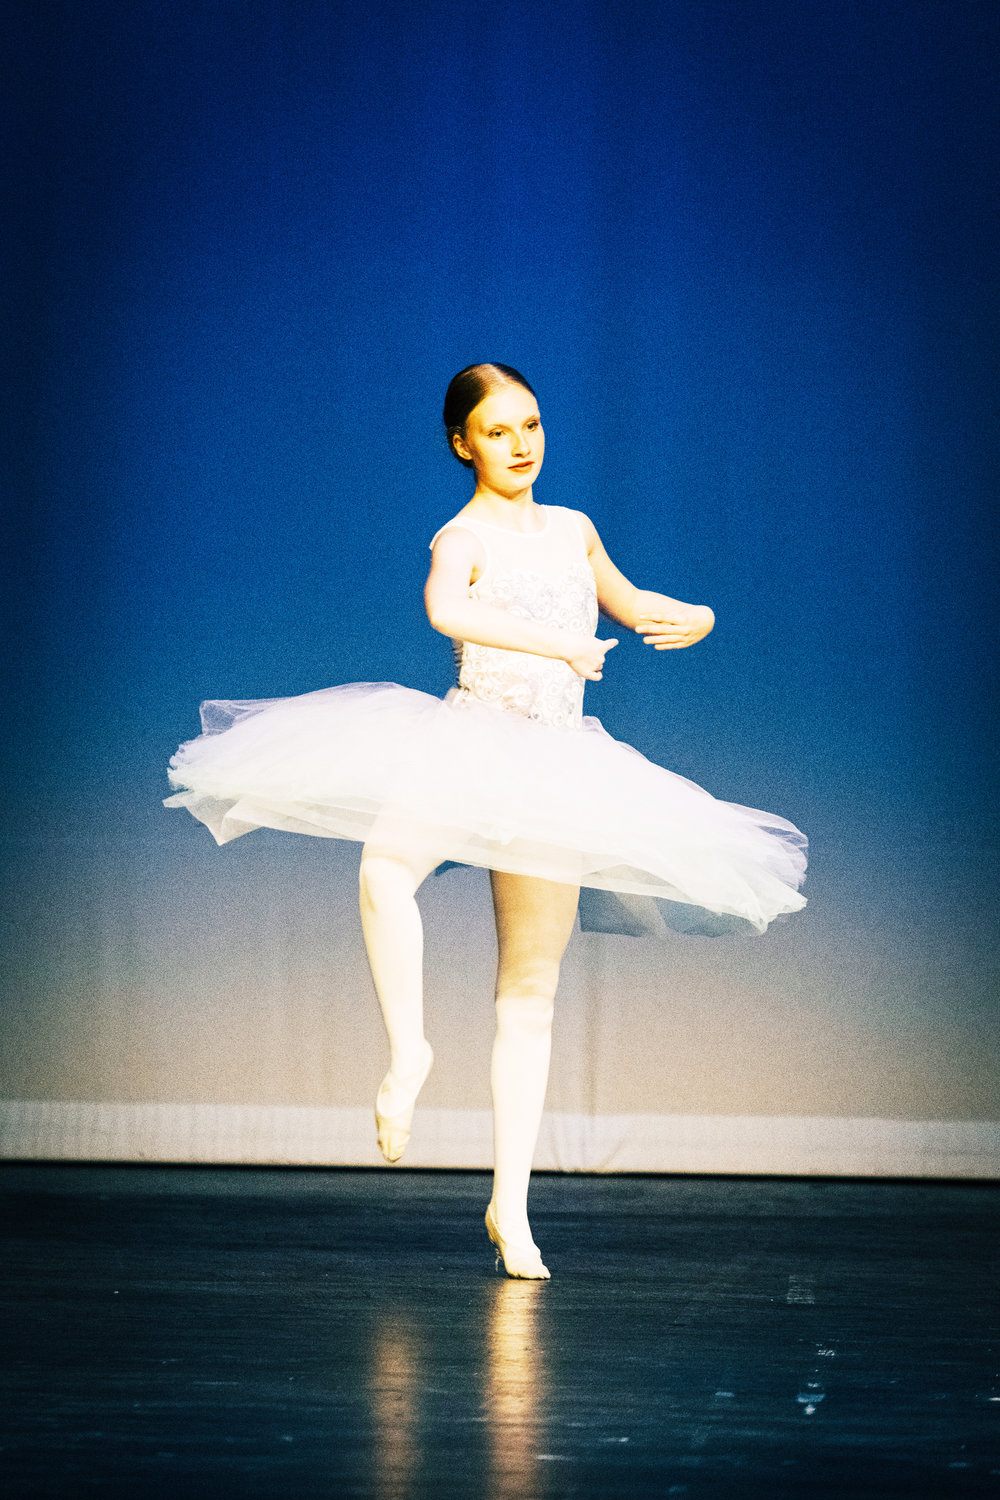 Harper Fuller performs “Paquita Variation” as choreographed by Marius Petipa as part of Pittsburg Ballet’s Spring Showcase at Memorial Auditorium on Thursday, May 19.